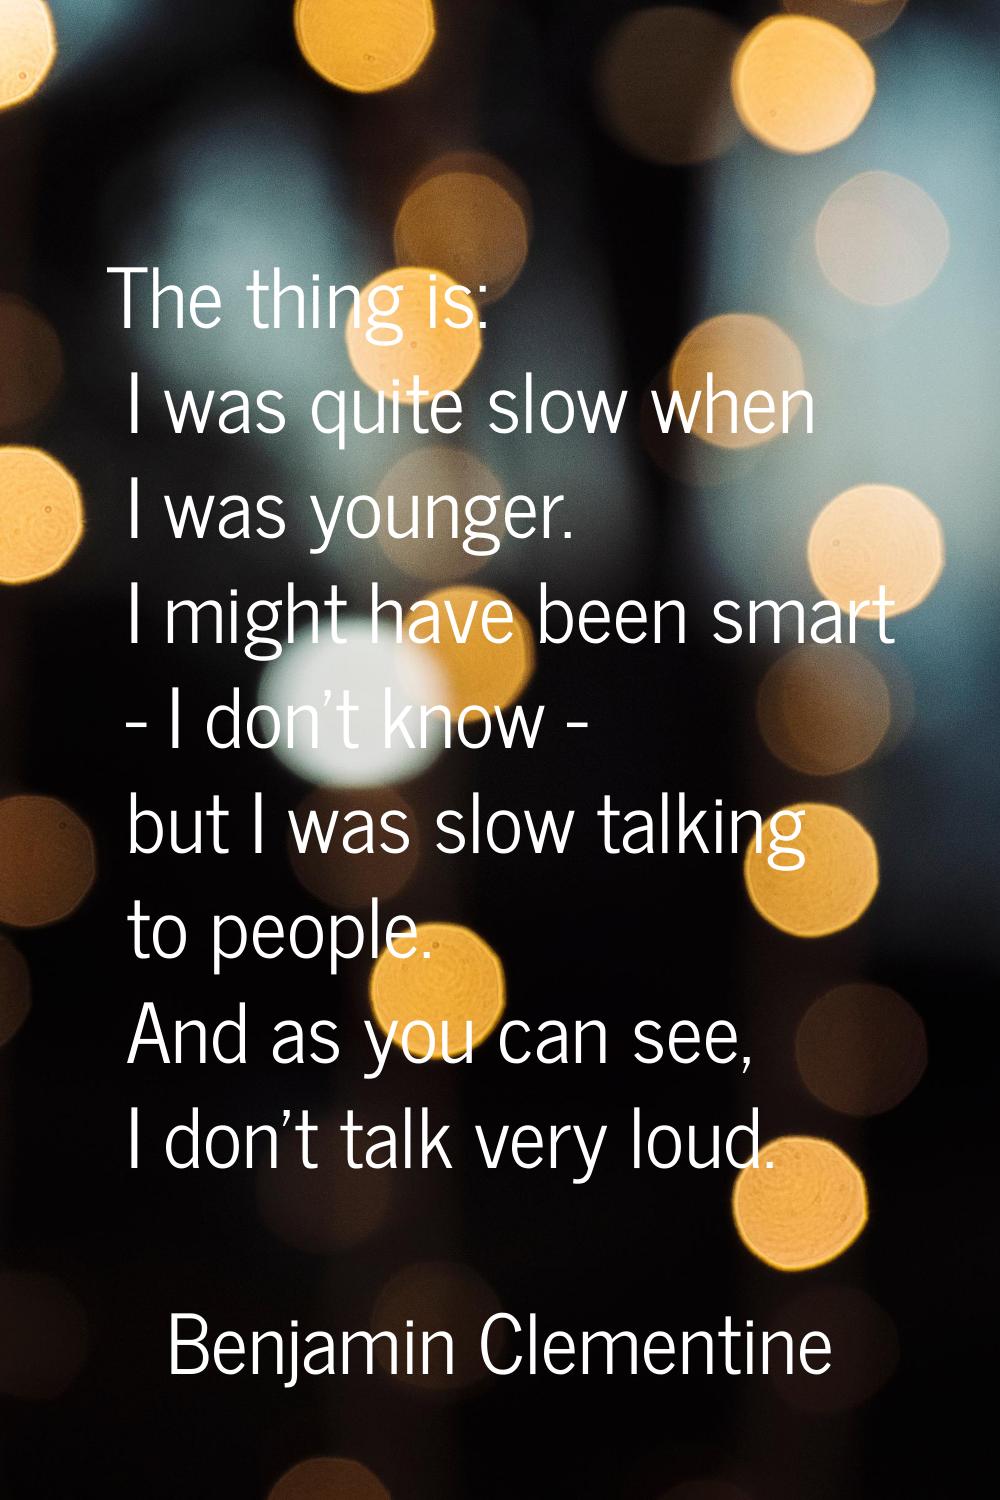 The thing is: I was quite slow when I was younger. I might have been smart - I don't know - but I w